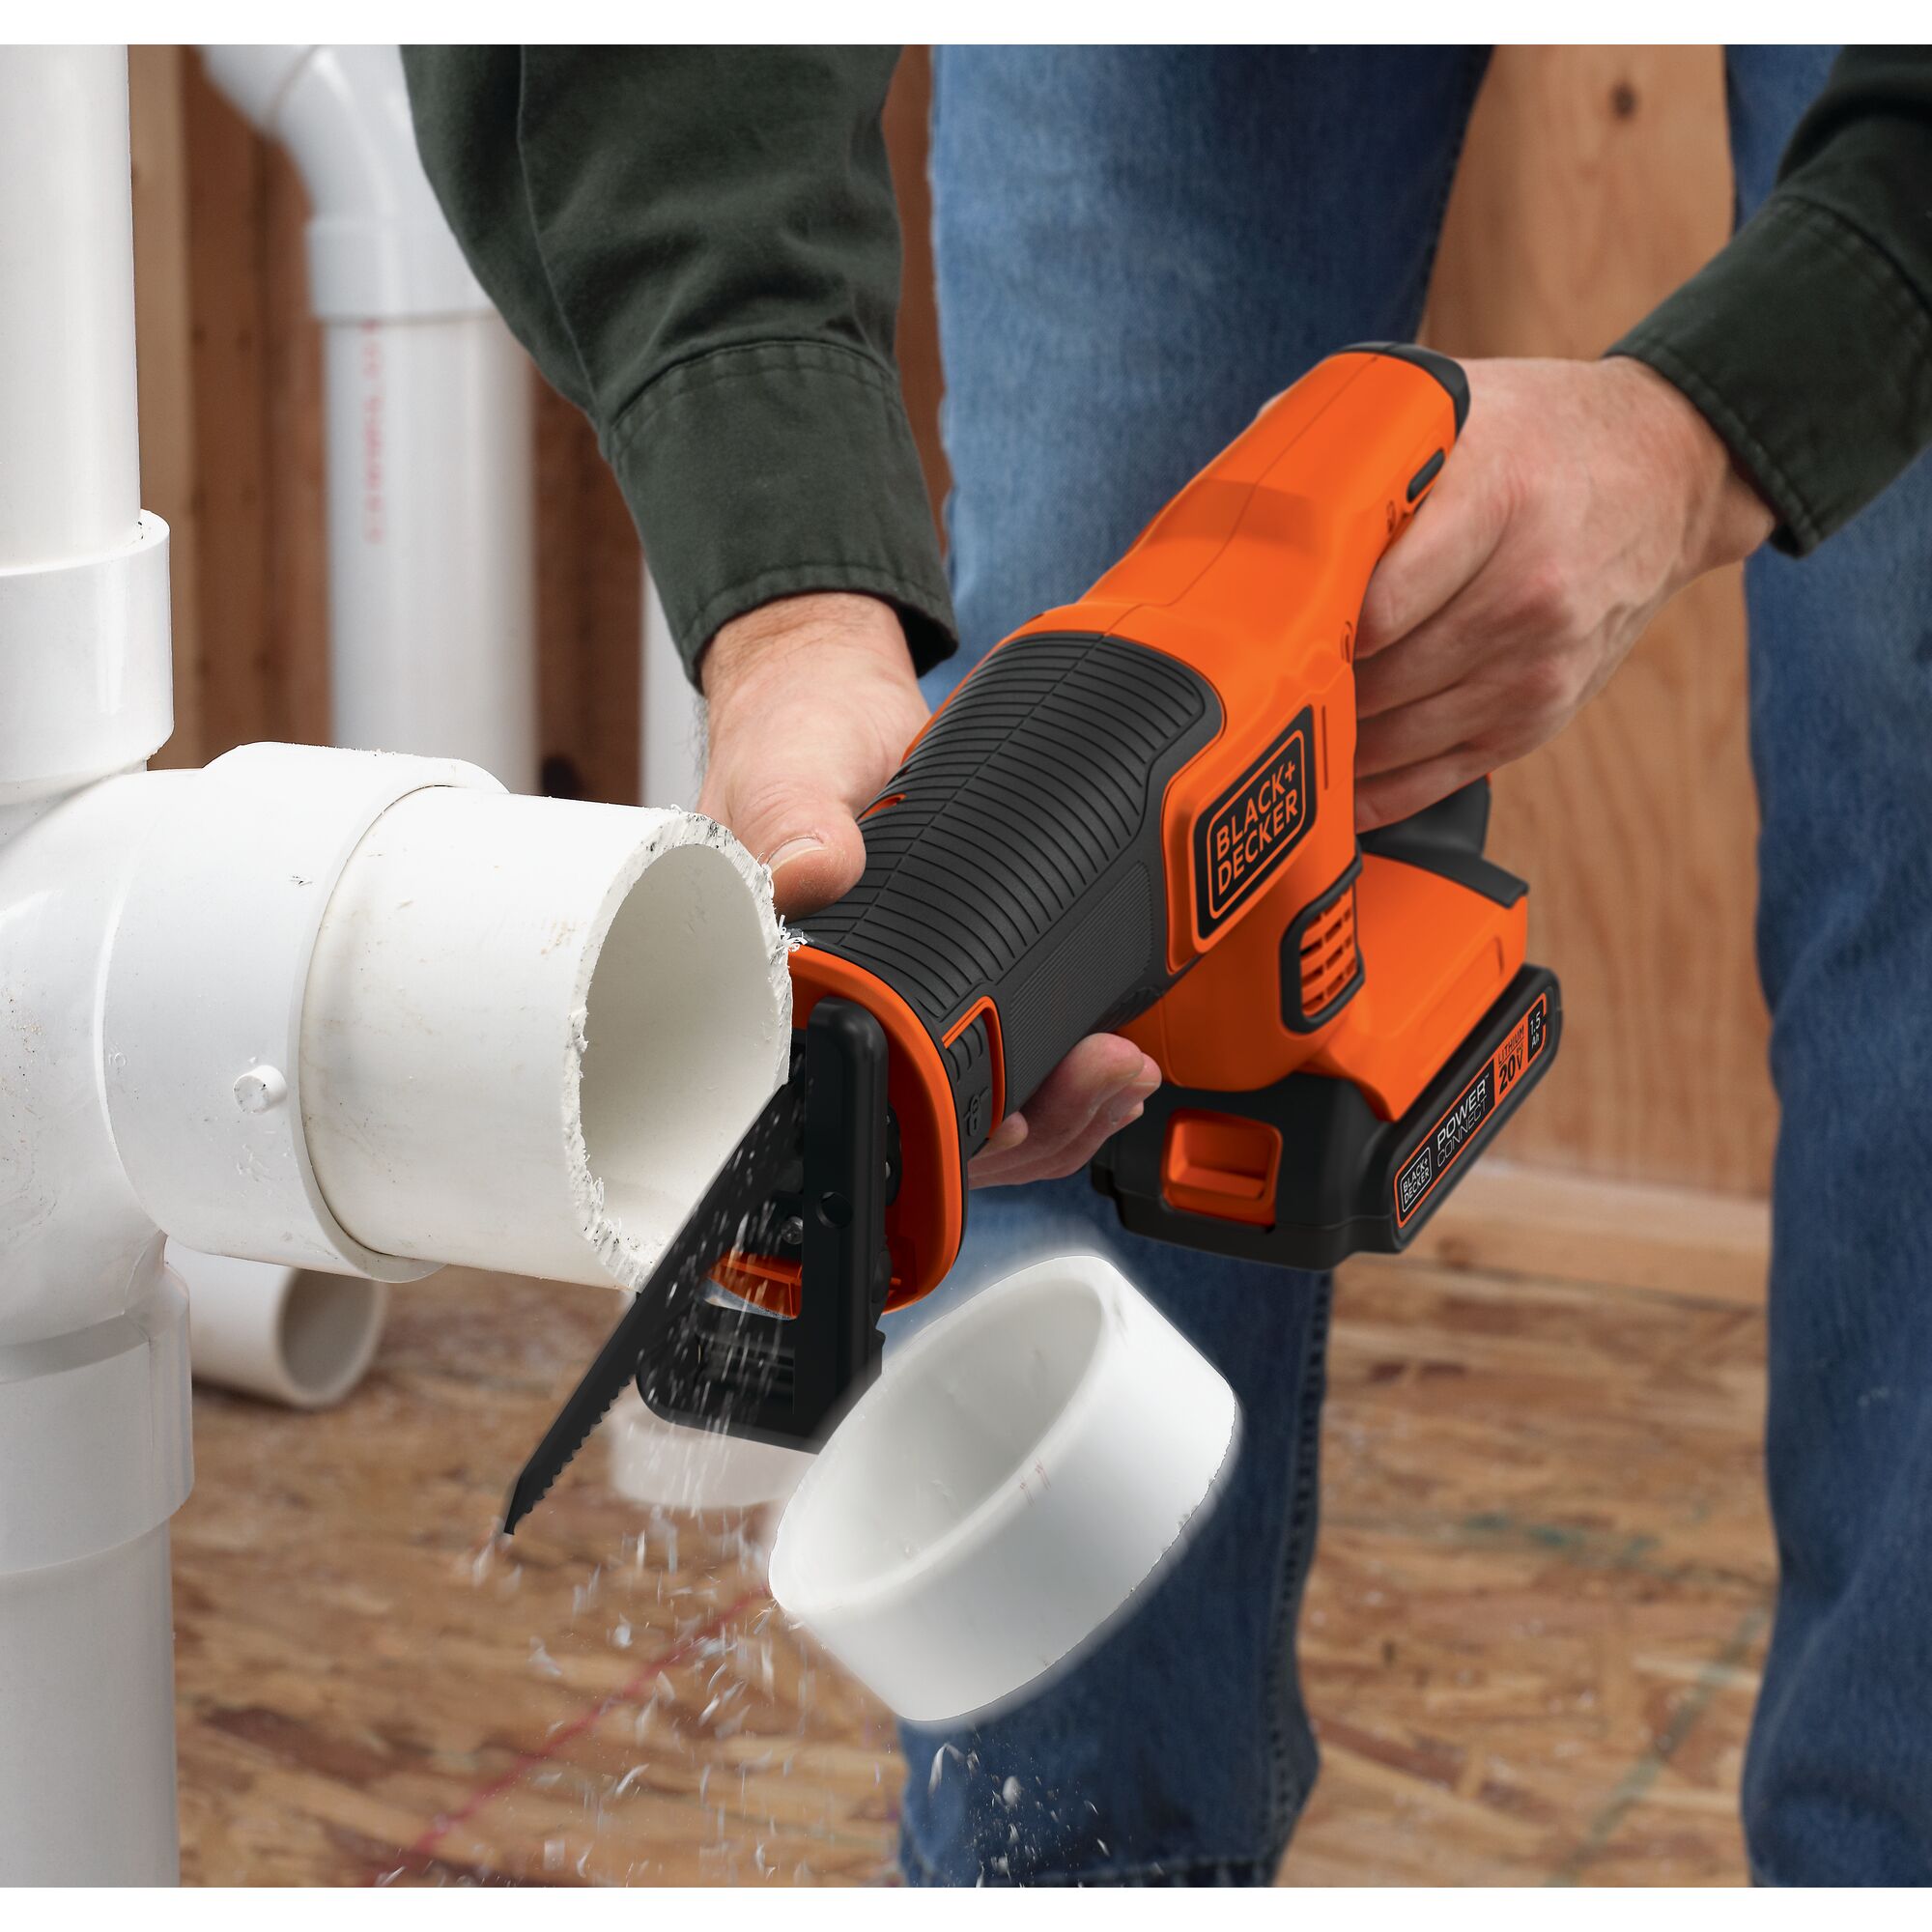 A person cutss a pipe with the BLACK+DECKER 20V MAX* Cordless Reciprocating Saw Kit. Powerful and versatile cuts through wood, metal, plastic, rubber, and more.